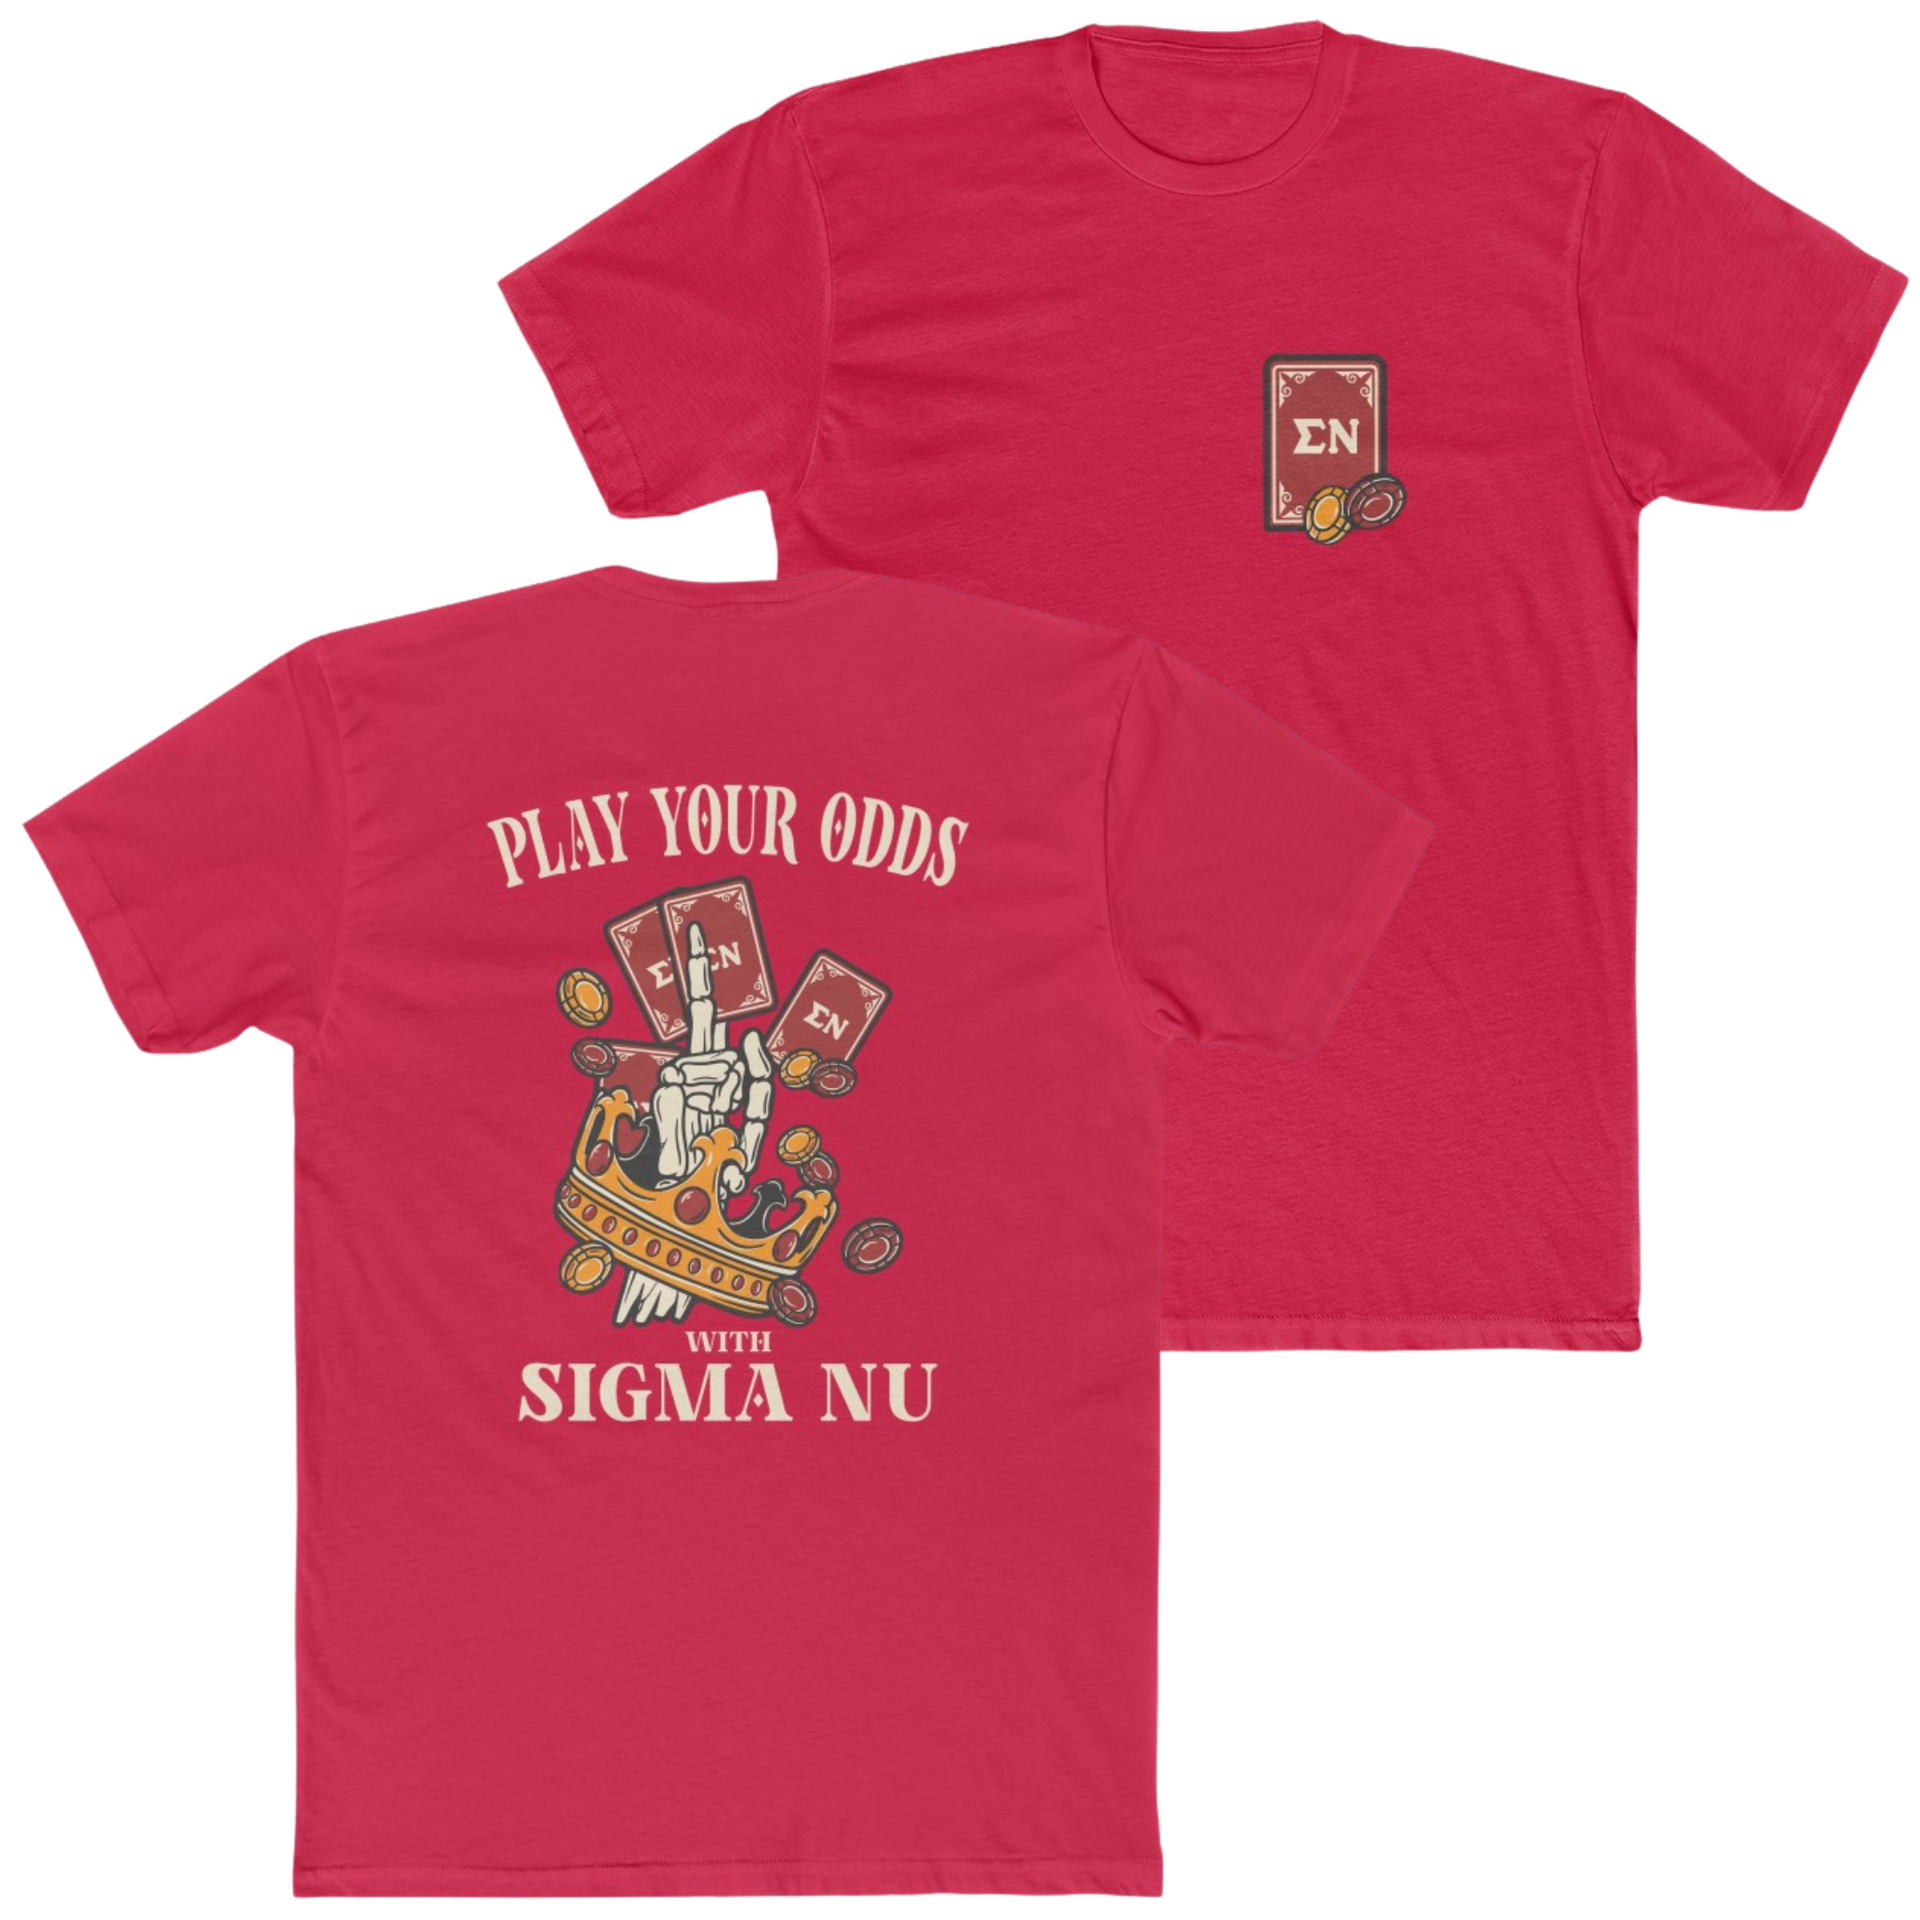 Red Sigma Nu Graphic T-Shirt | Play Your Odds | Sigma Nu Clothing, Apparel and Merchandise